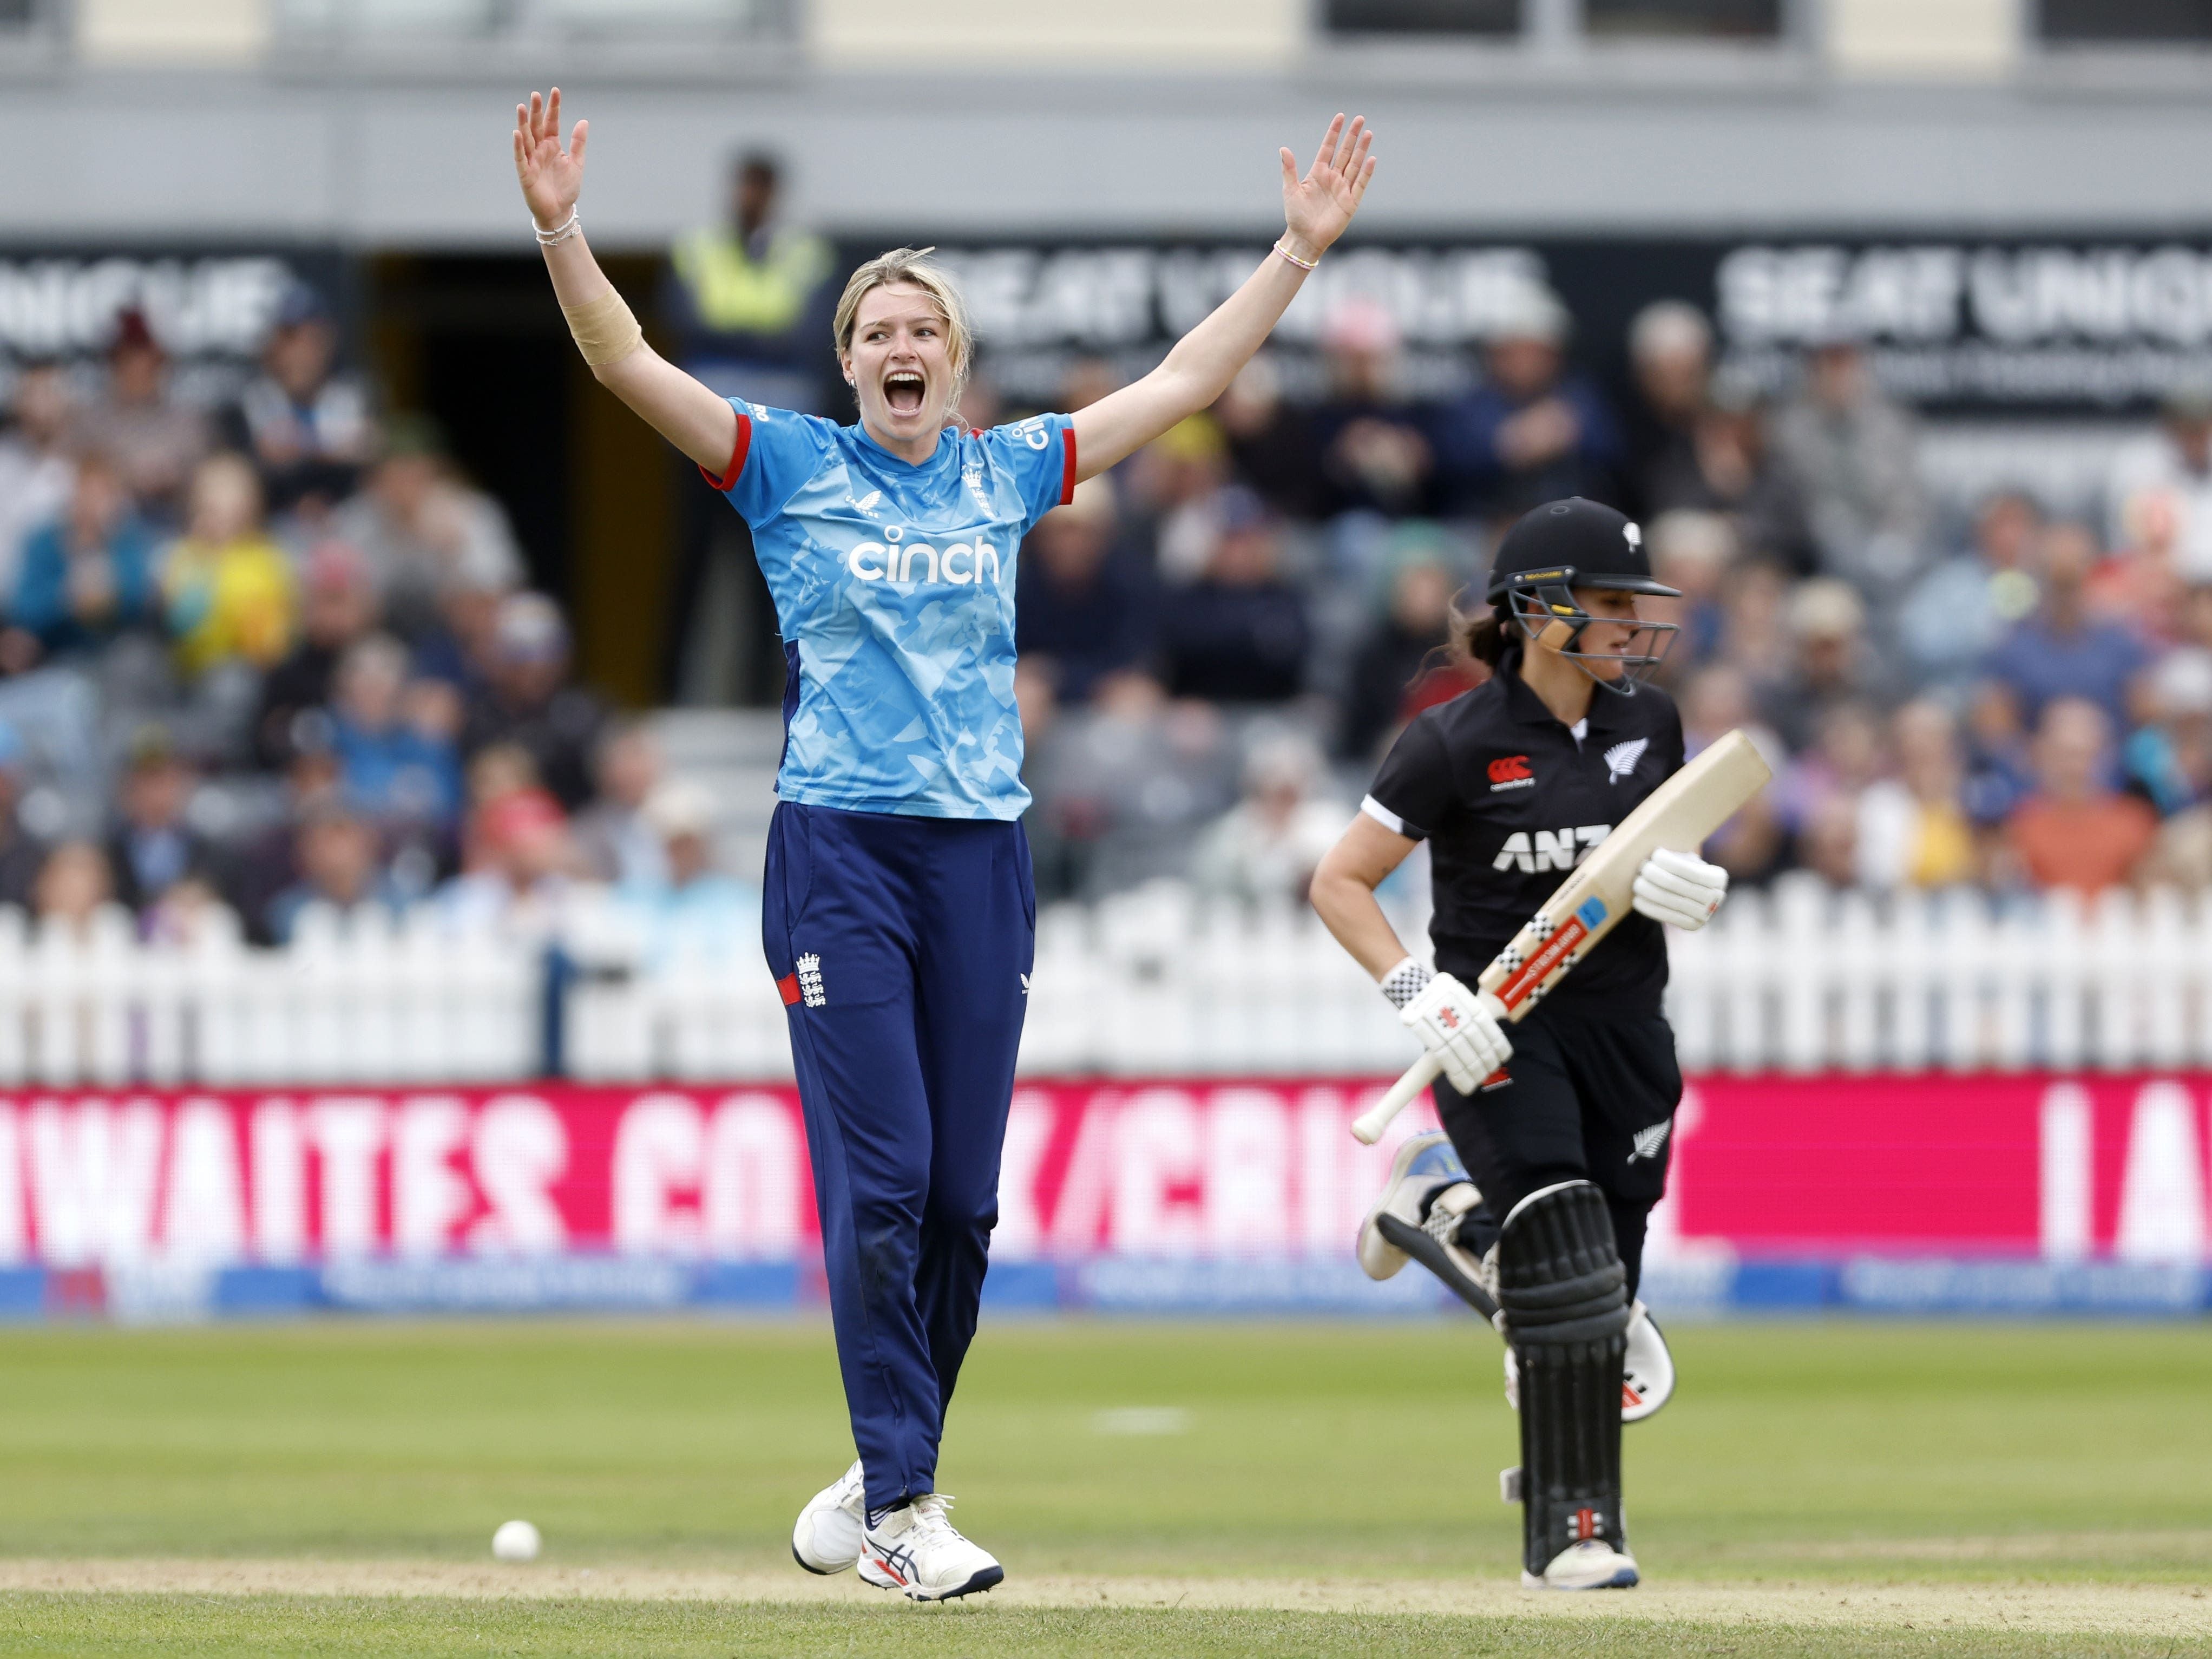 Lauren Bell confident changes to her bowling action will have long-term benefits